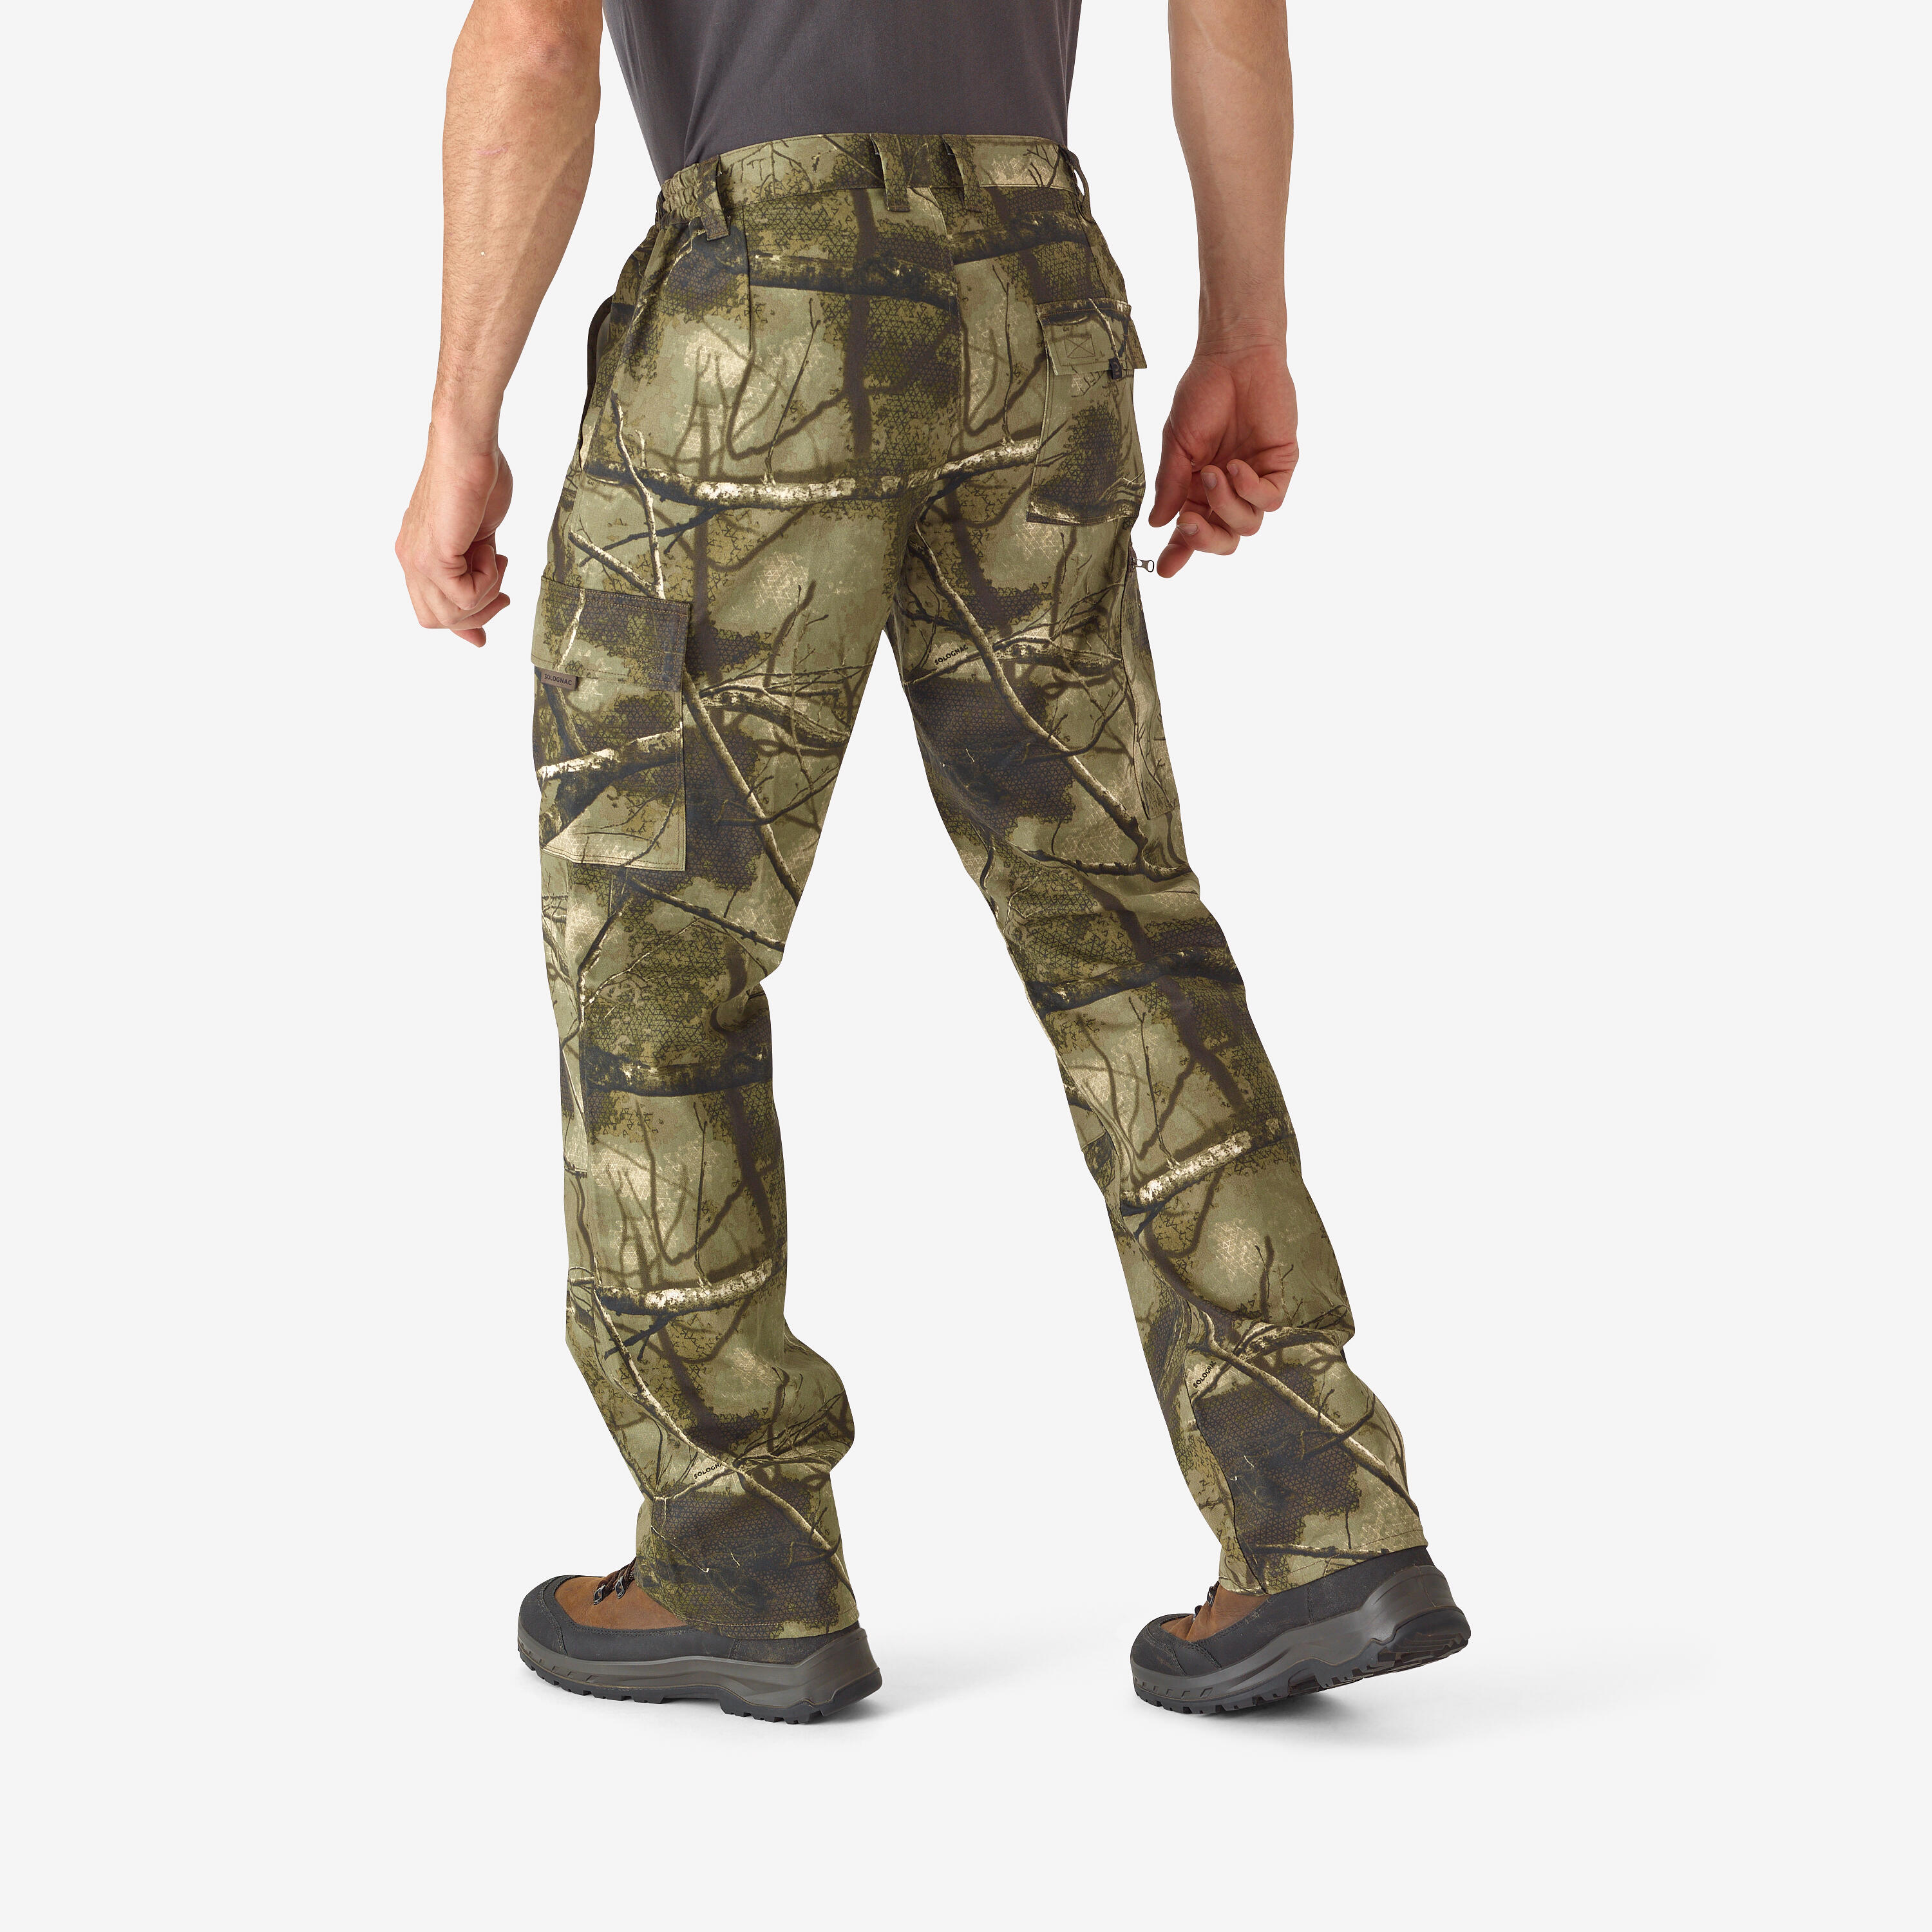 HUNTING BREATHABLE SILENT COTTON TROUSERS 100 TREEMETIC CAMOUFLAGE 2/6